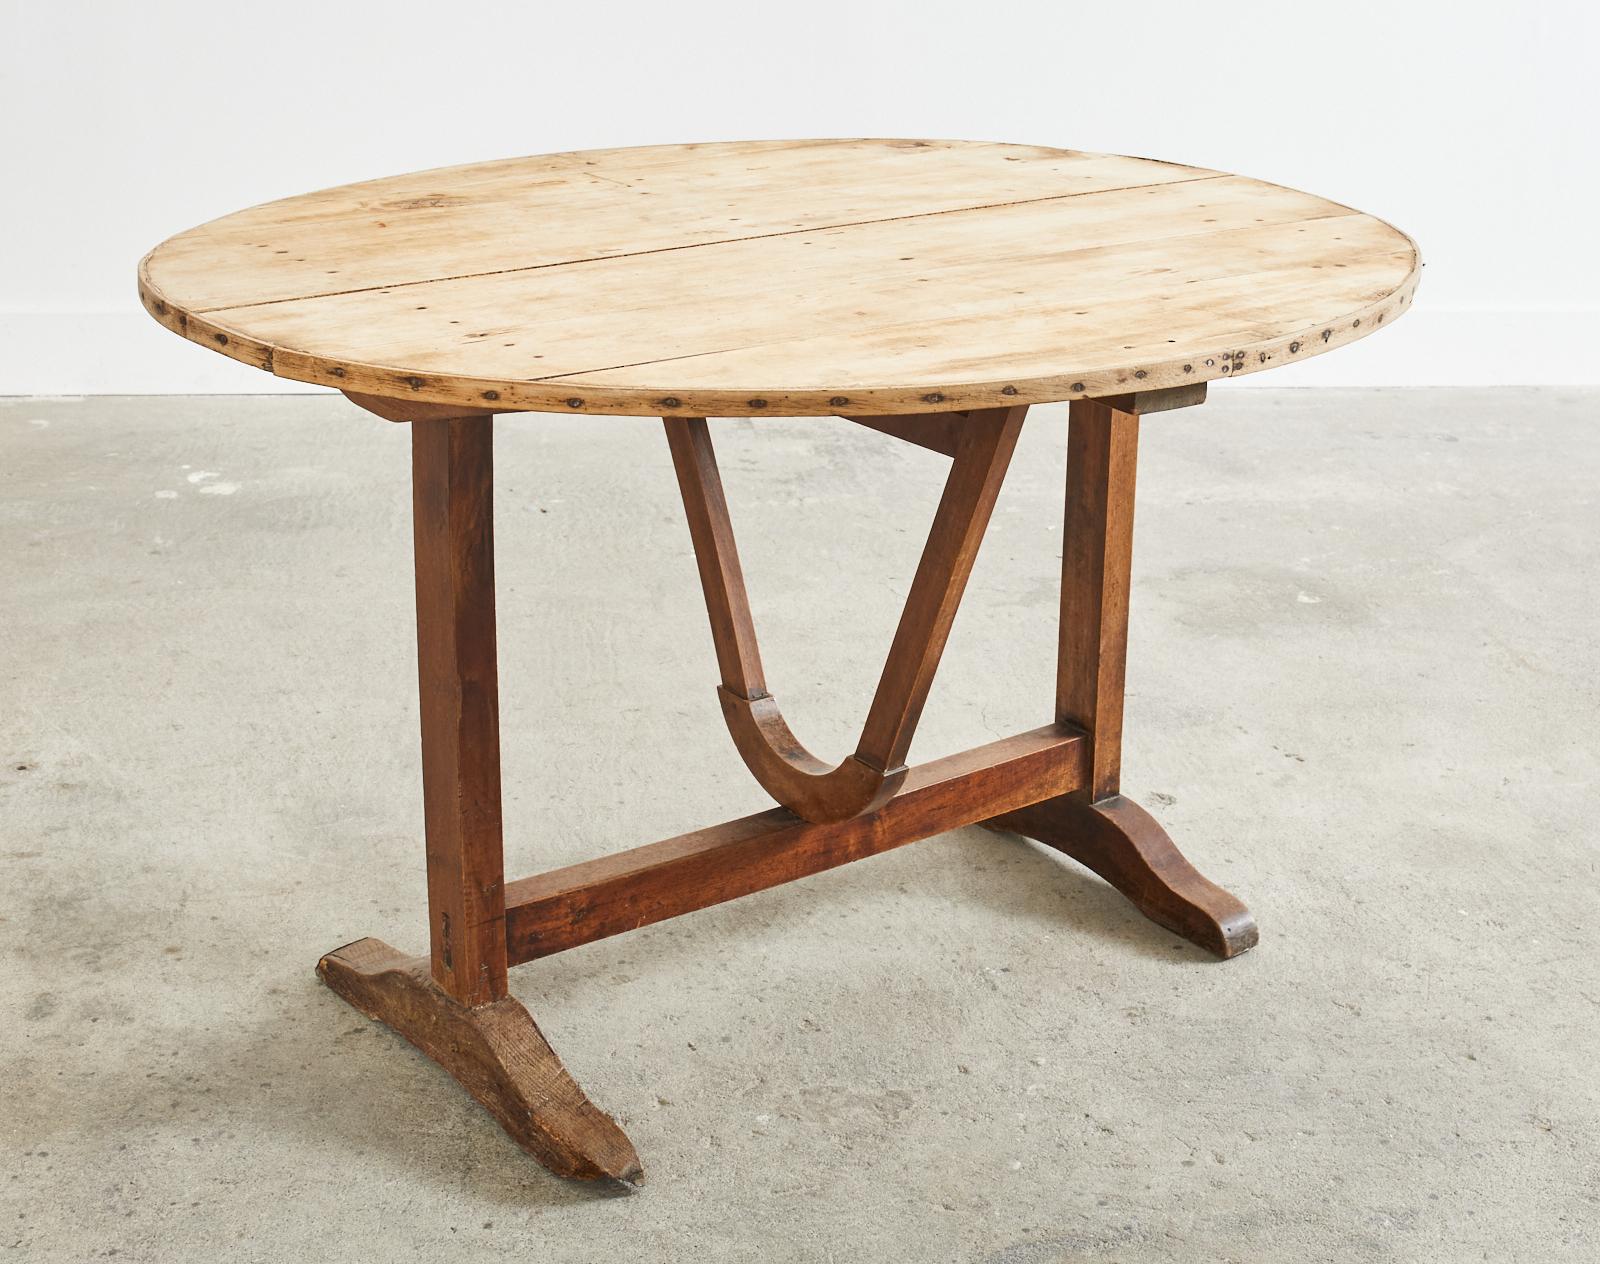 Hand-Crafted 19th Century French Pine Wine Tasting Tilt-Top Table